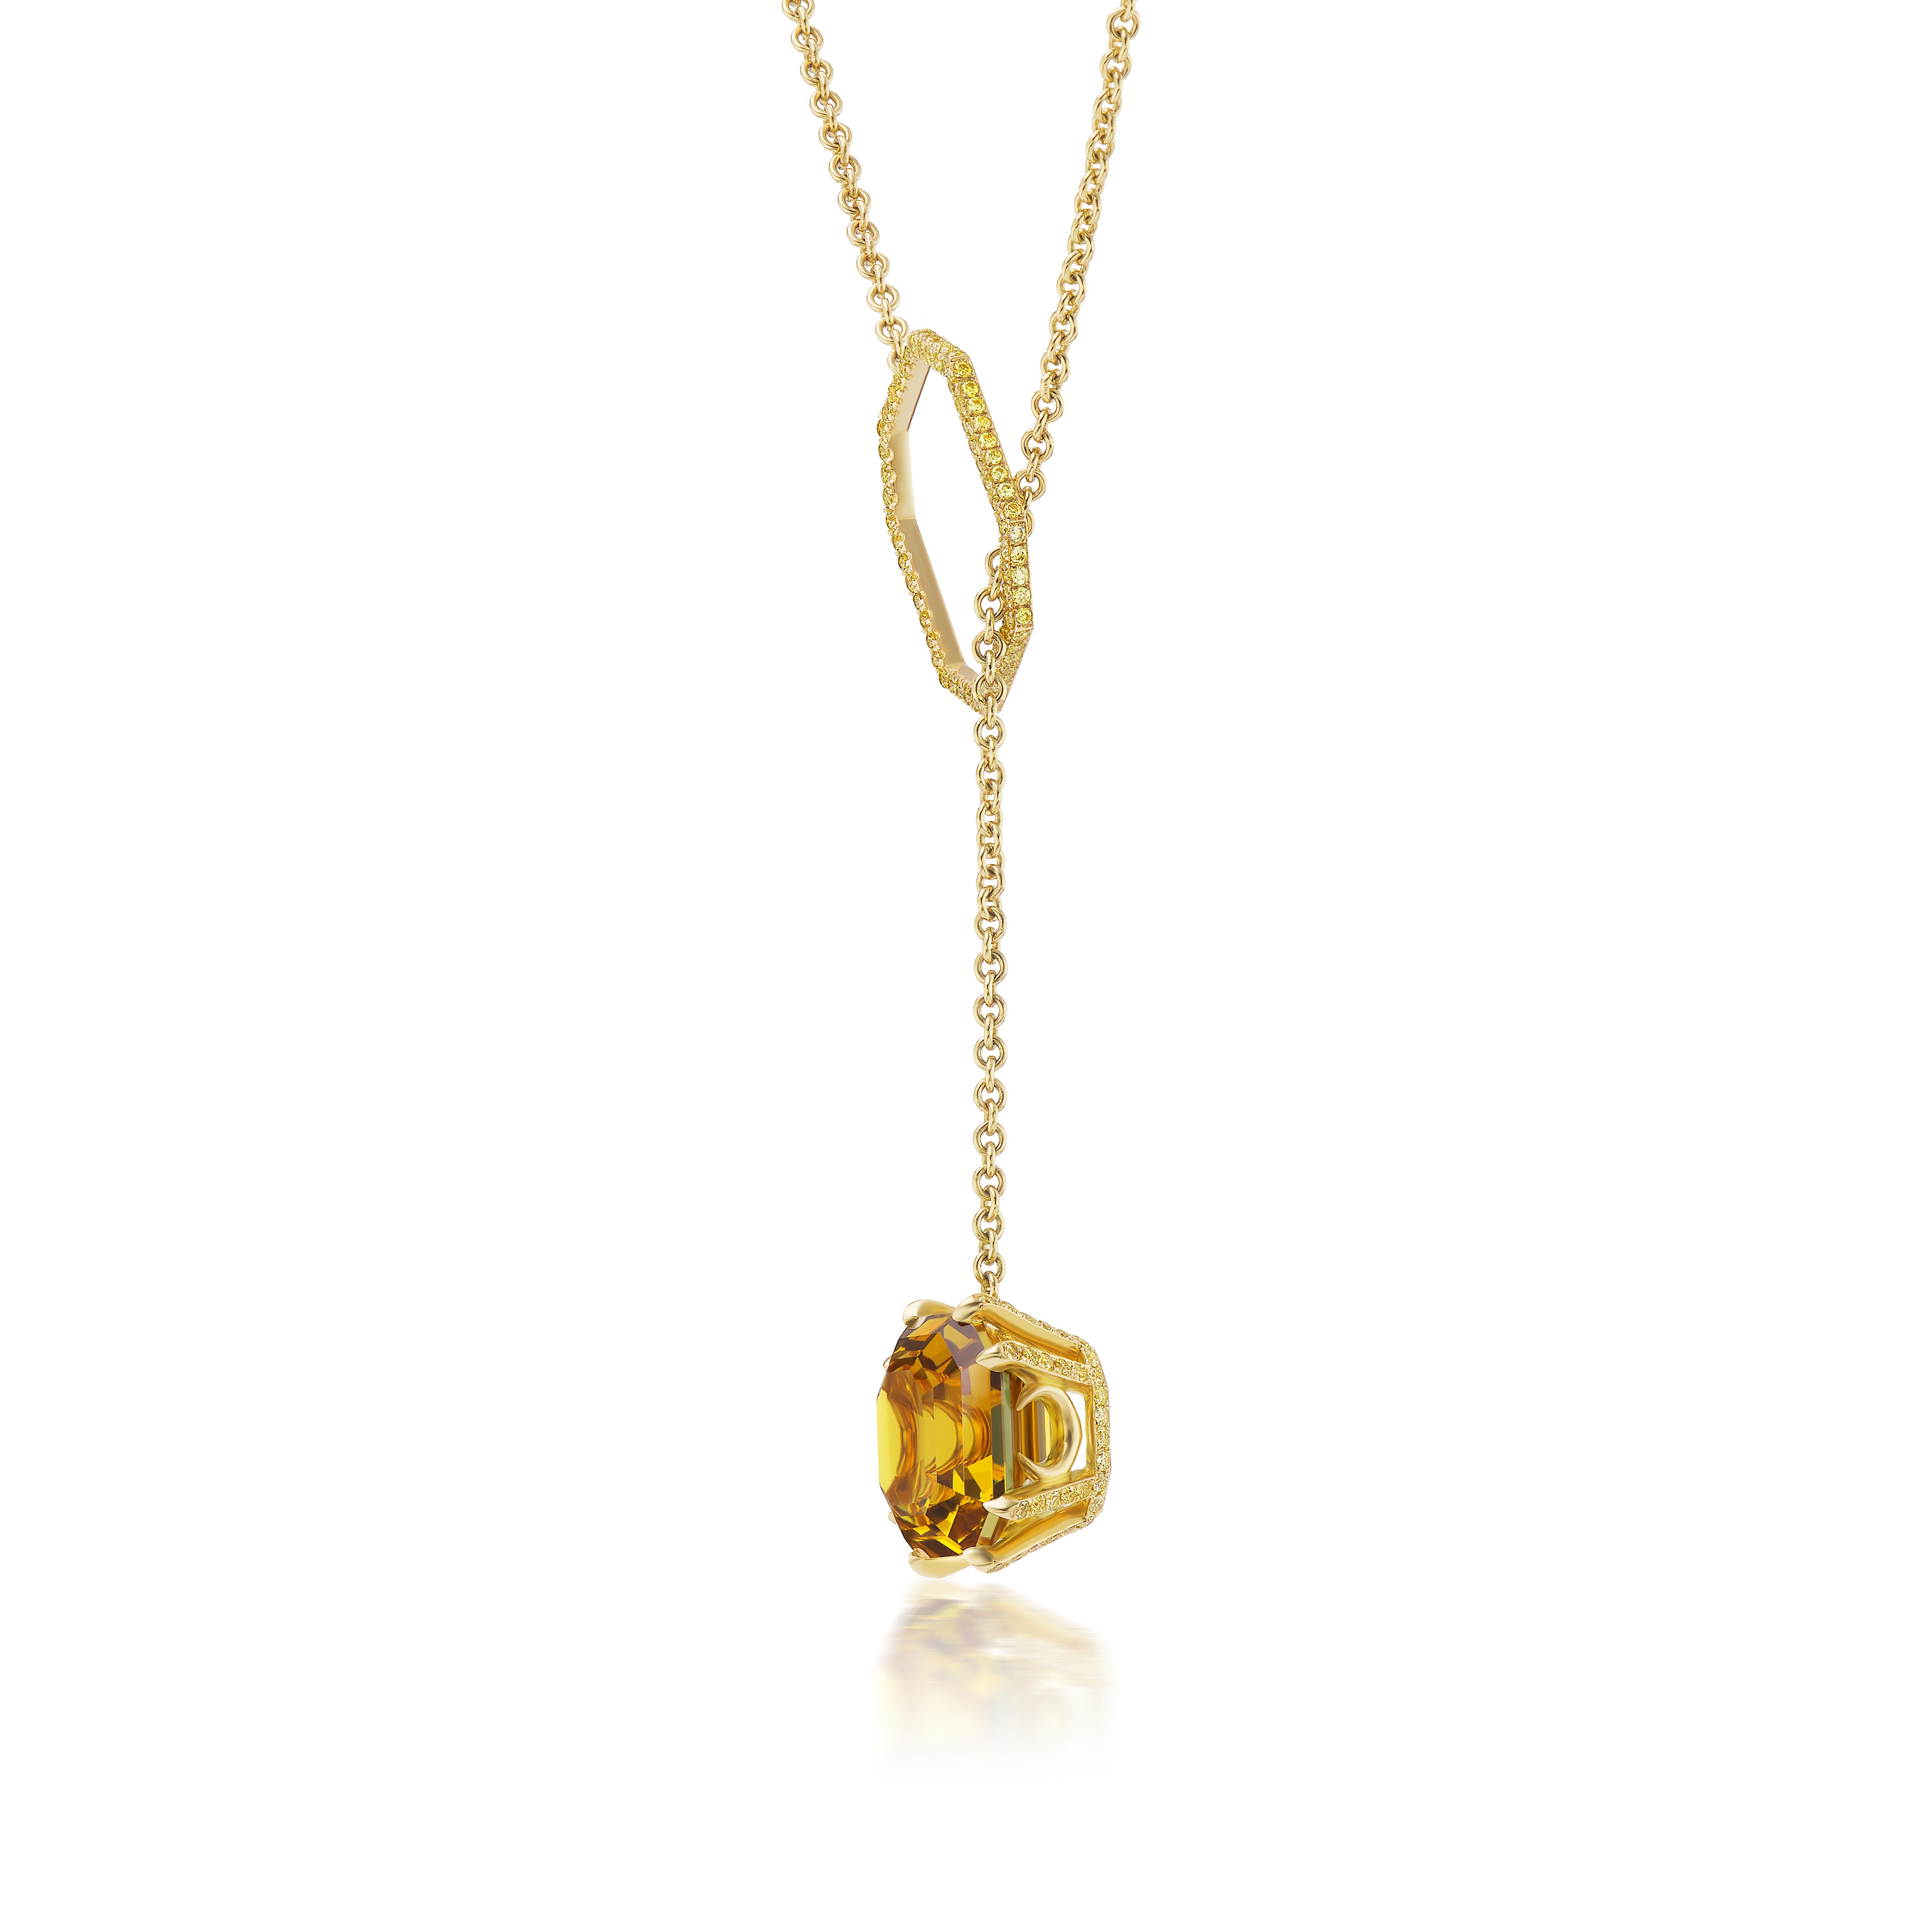 The Studio 54 Necklace: Gold on gold tones make this adjustable necklace a classic

The Design:
A fashionable choker. A sexy lariat. A luxuriously long pendant. This 18k yellow gold pendant Y necklace is all of these things and everything in